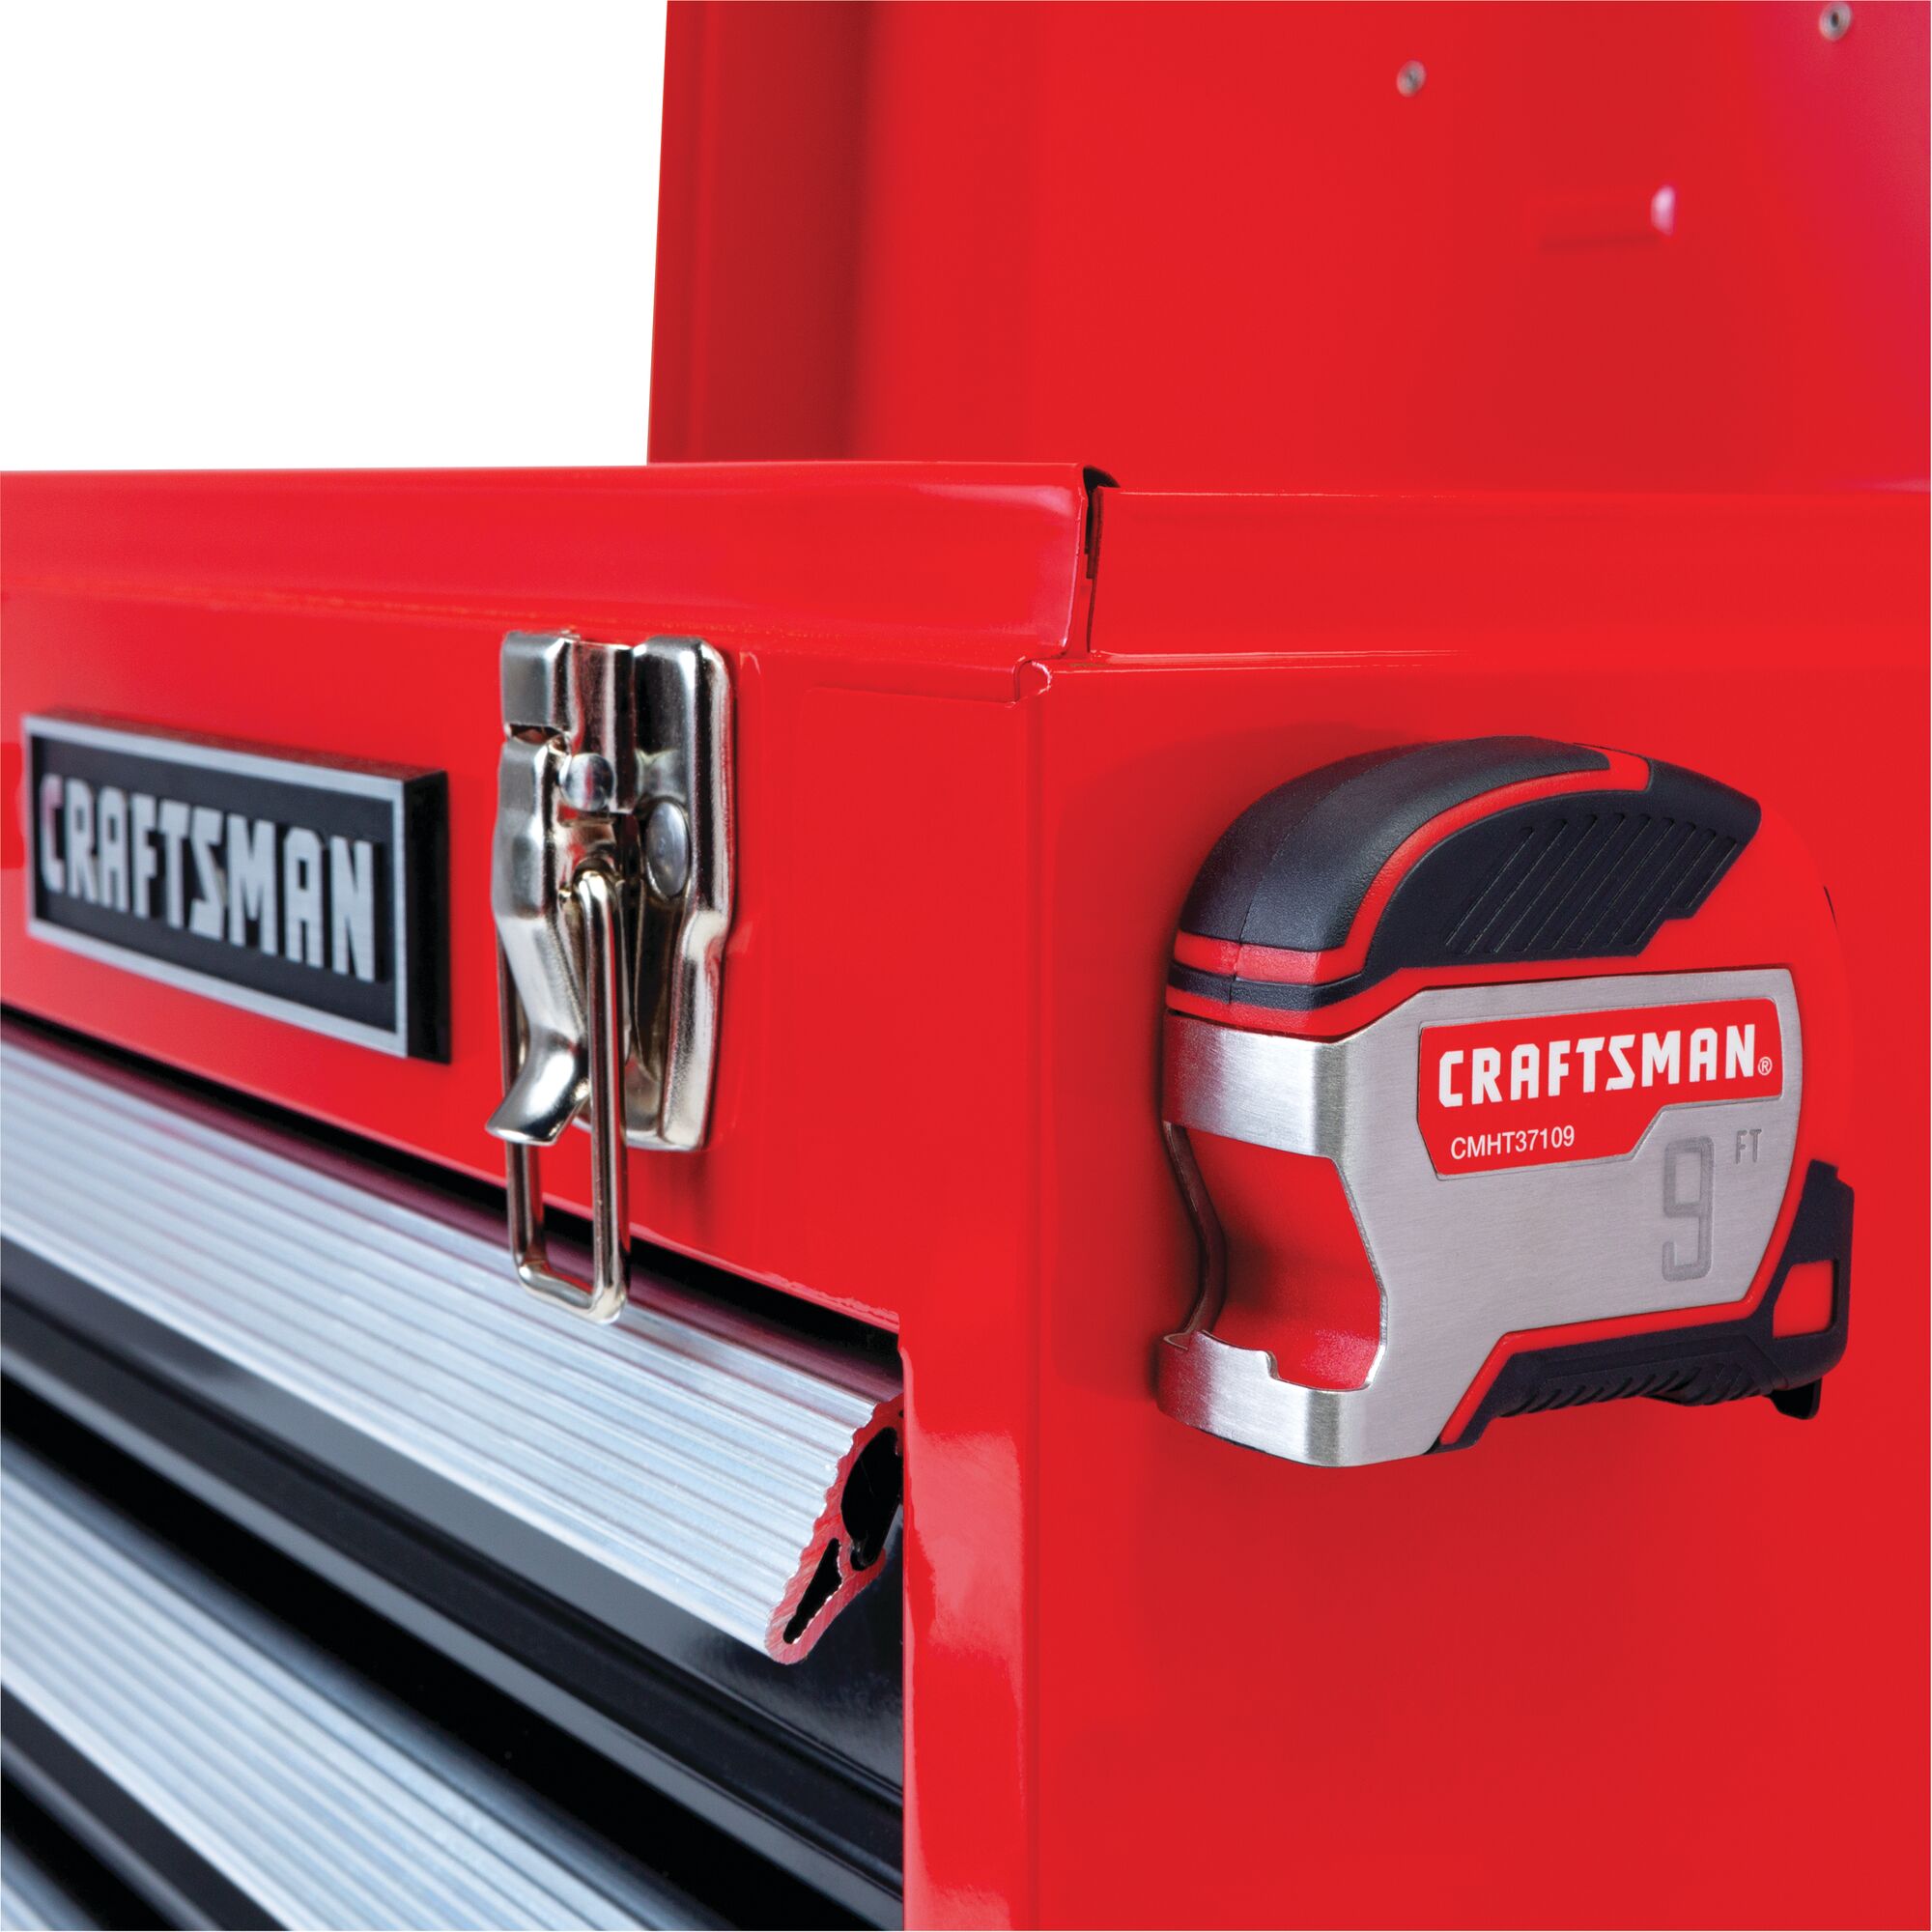 View of CRAFTSMAN Measuring: Short Tapes highlighting product features